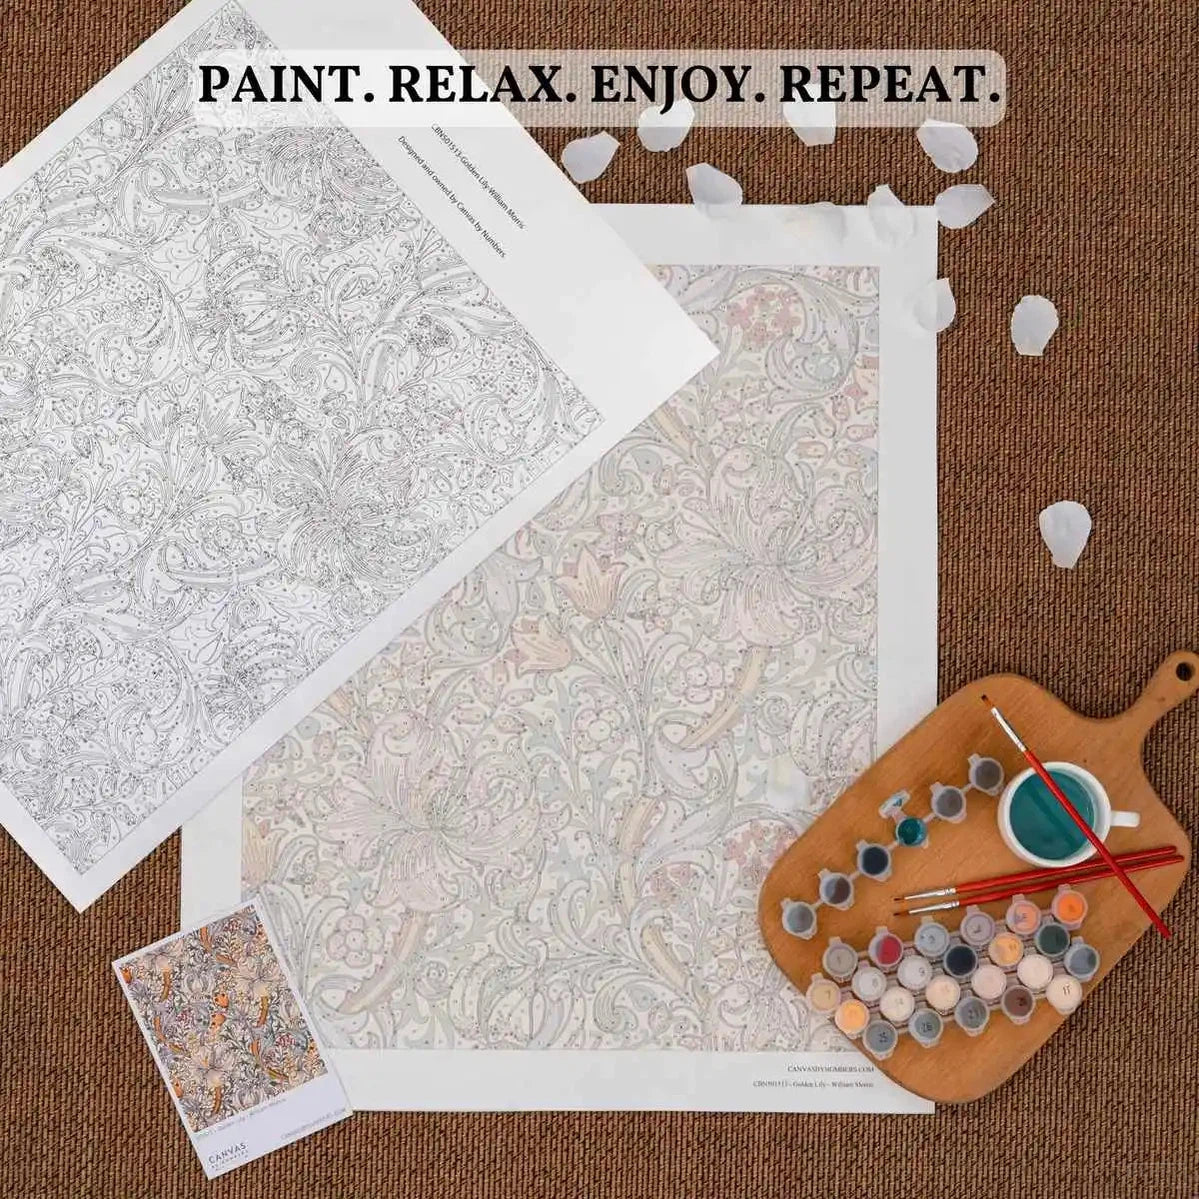 Almond Blossom - Paint by Numbers-The Almond Blossom paint by numbers by Van Gogh is one of the most emblematic painting kits you can buy. Get yours and enjoy a creative experience.-Canvas by Numbers